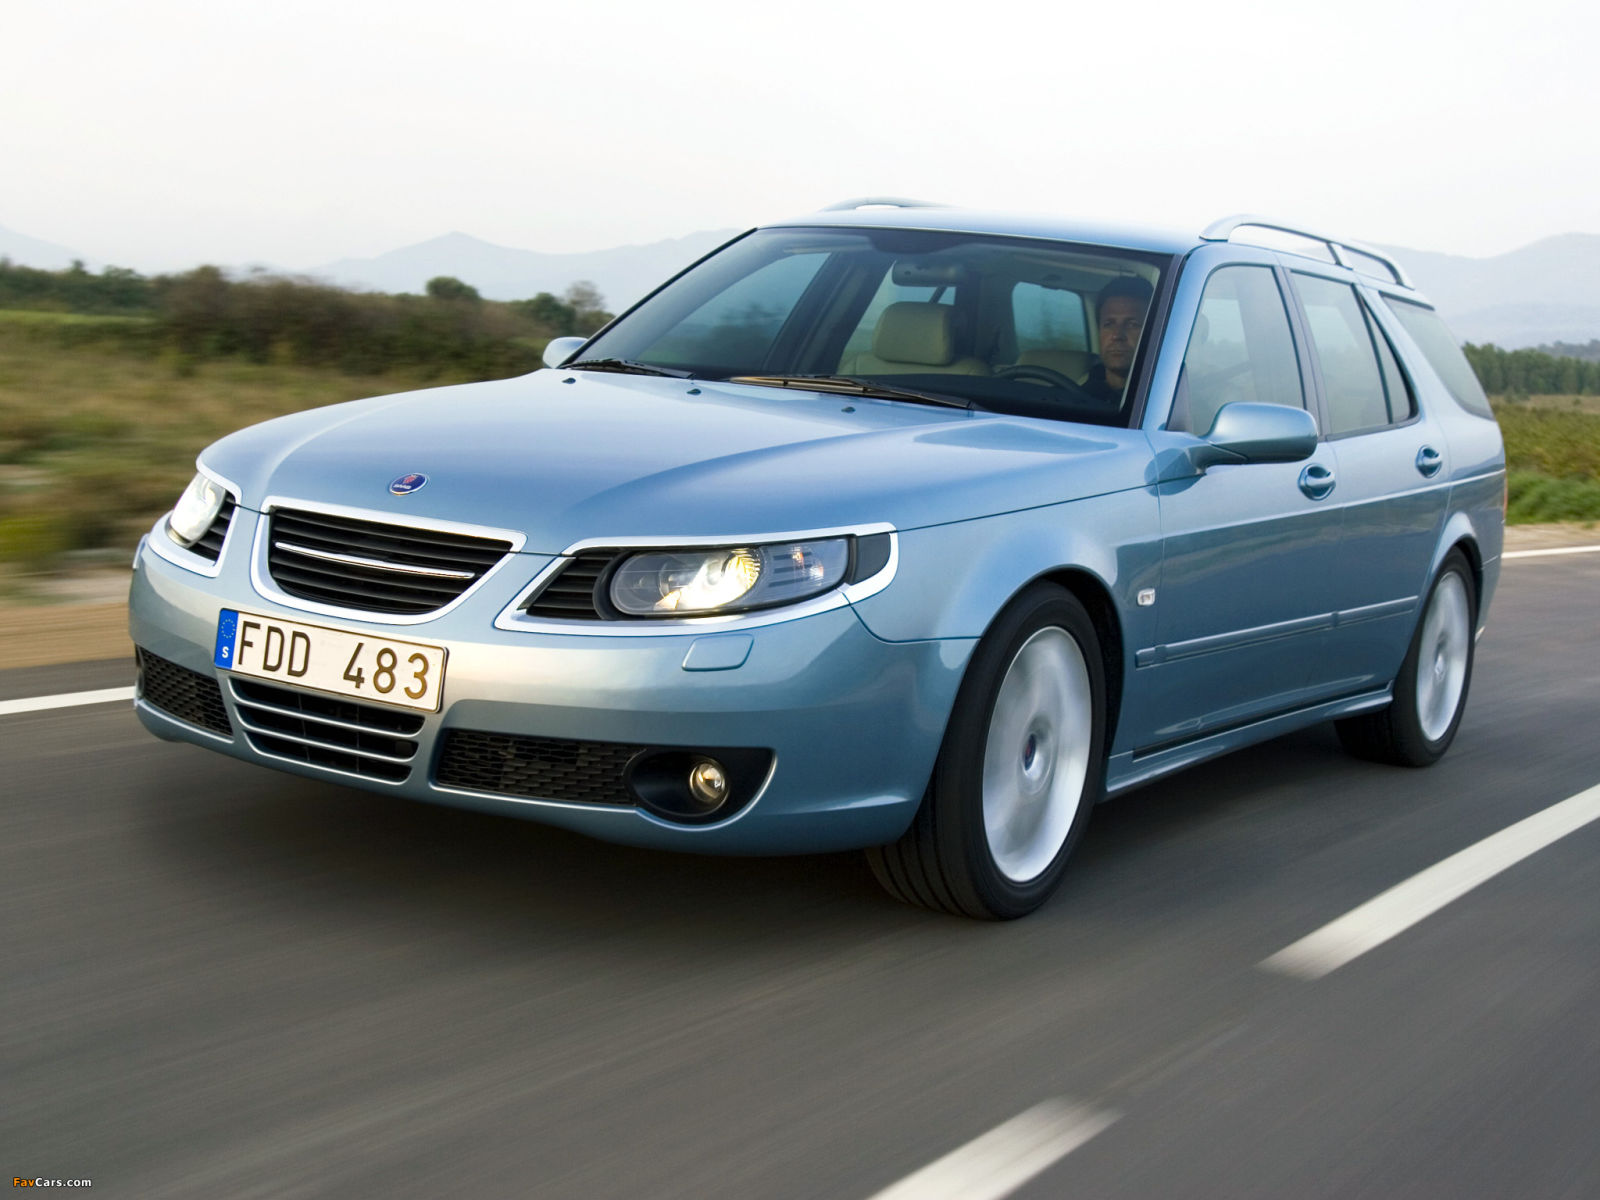 Illustration for article titled OK Oppo, school me on the Saab 9-5 Sportcombi